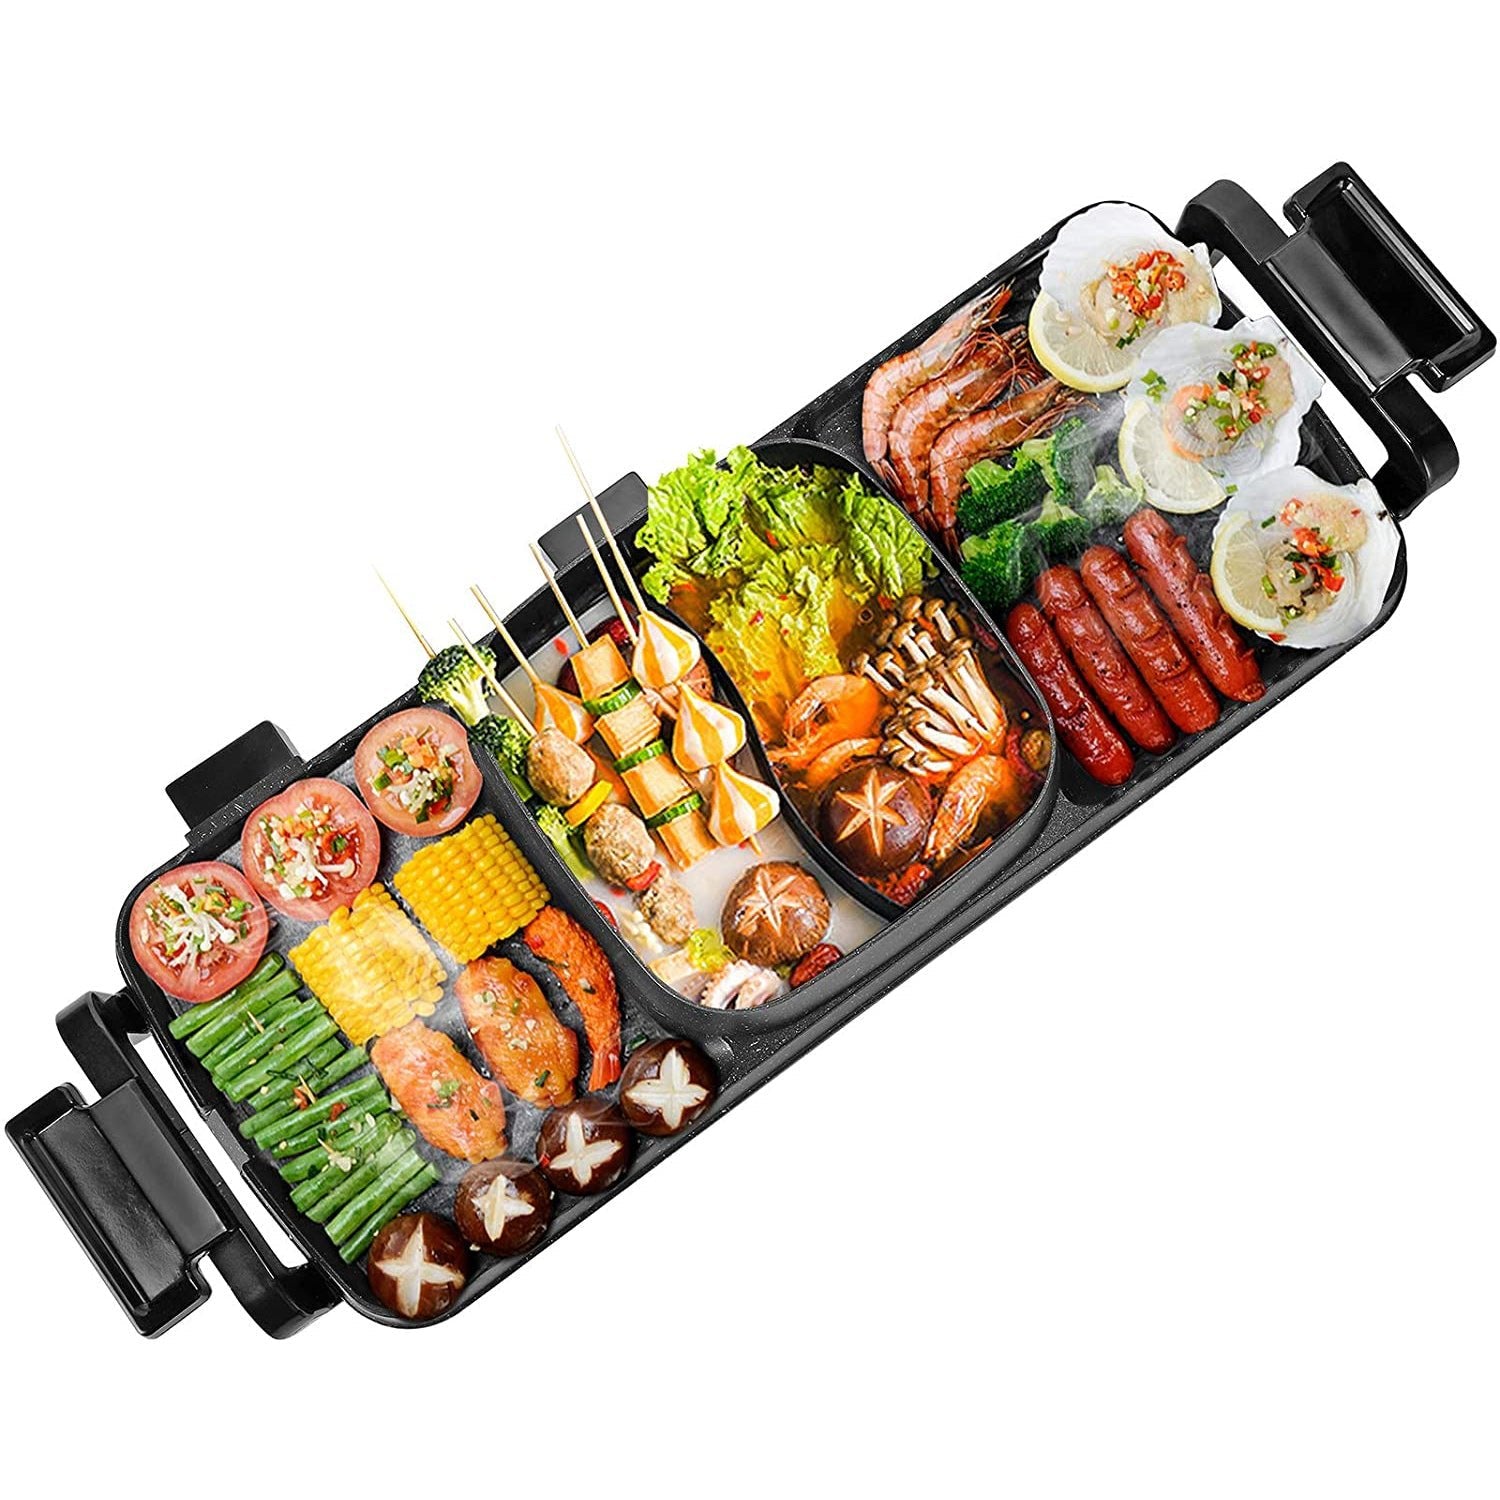 Large Electric Grill Hot Pot | 2 in 1 Electric Barbecue | Non-Stick Pan Grill | 2200W